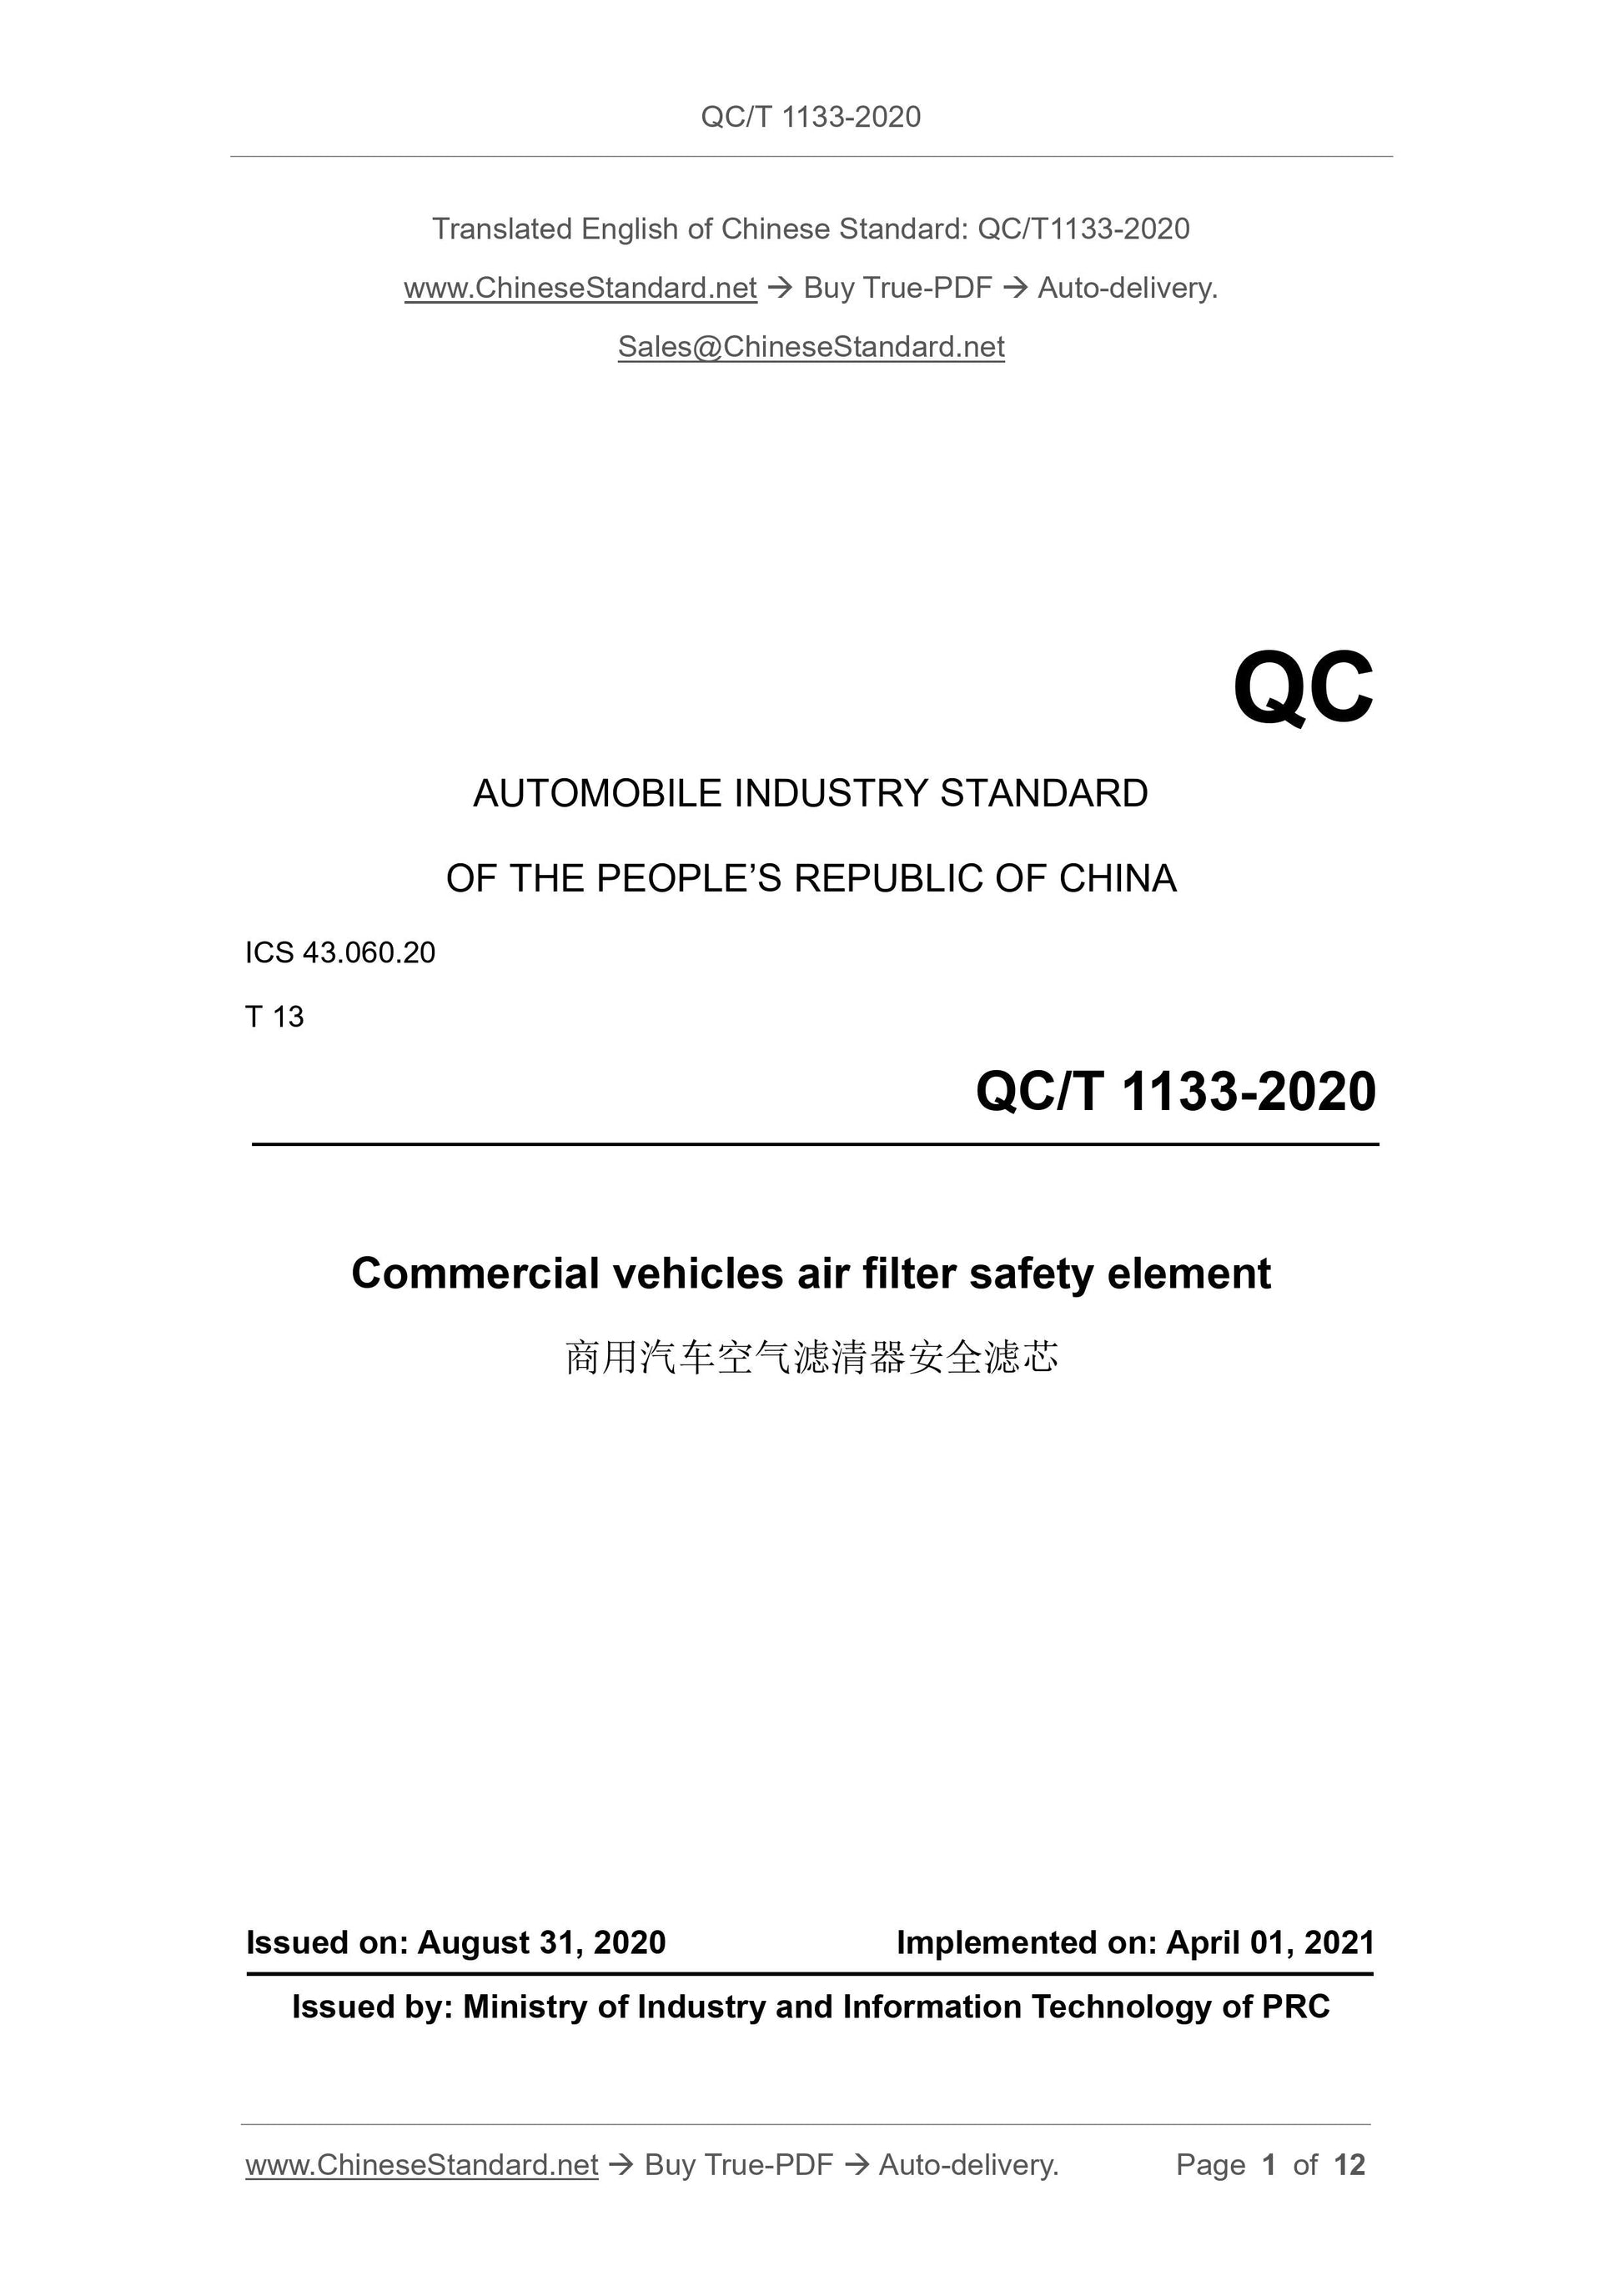 QC/T 1133-2020 Page 1